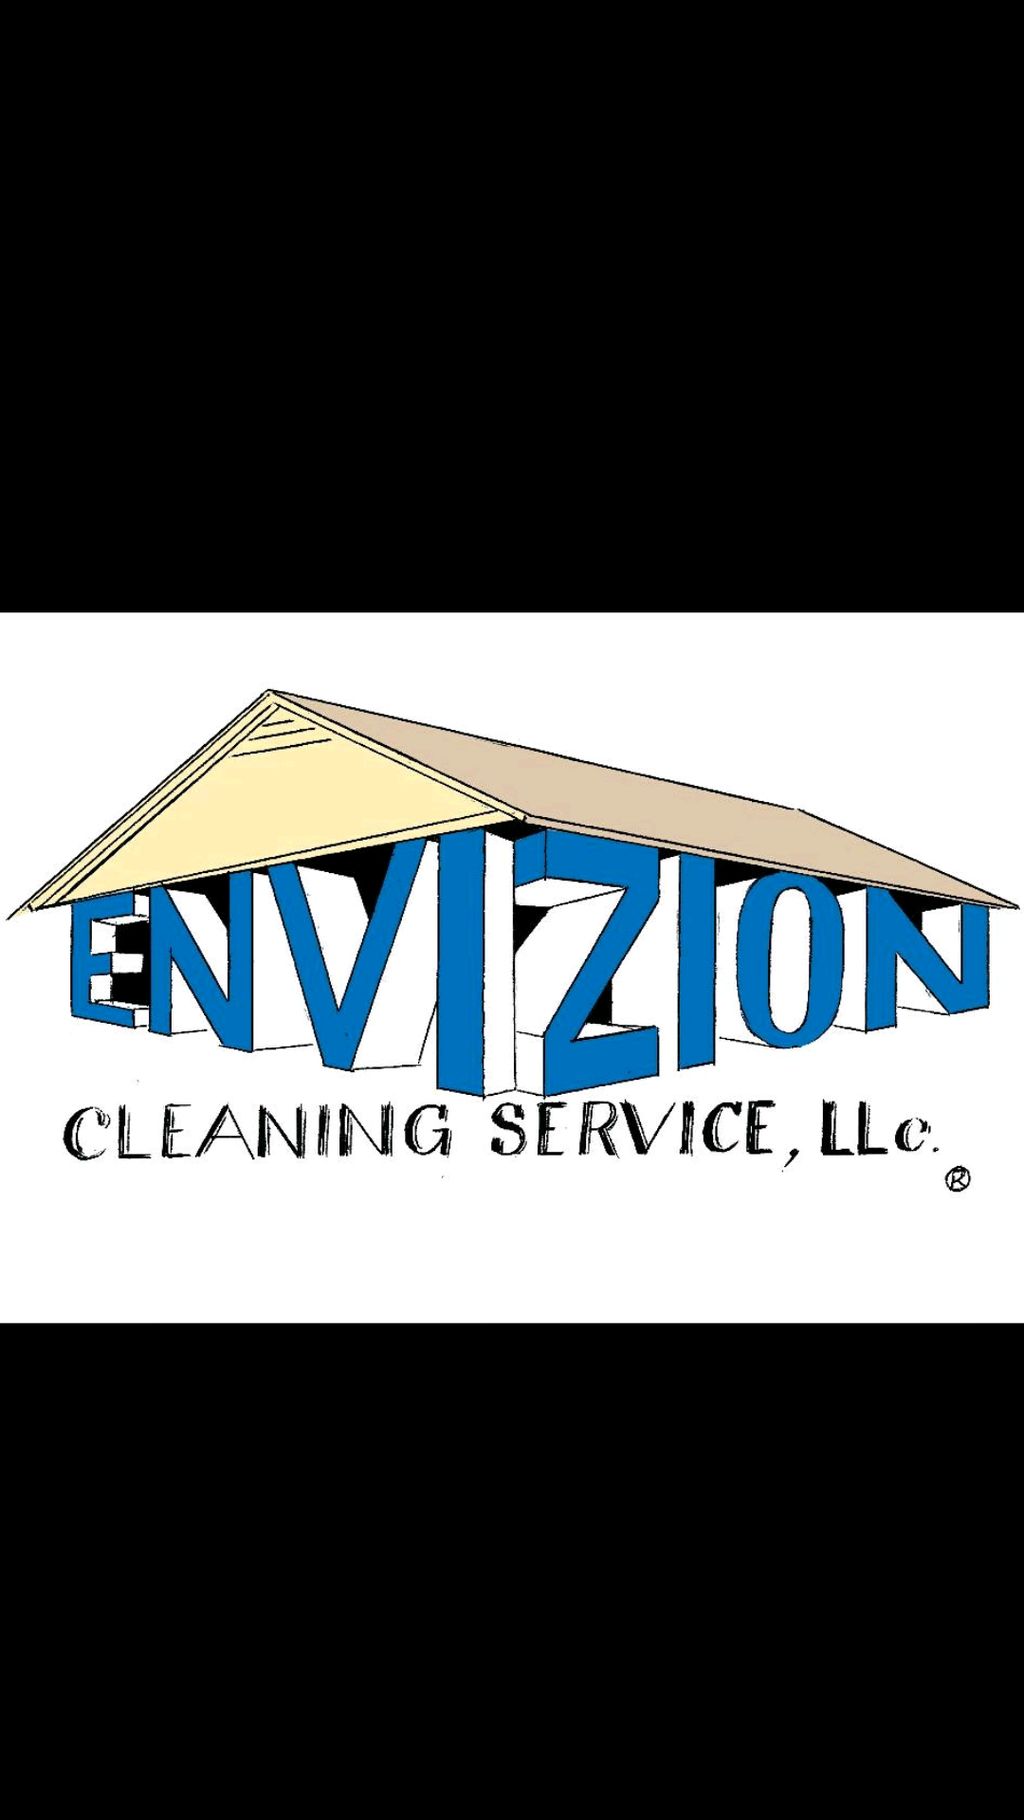 Envizion Cleaning Service